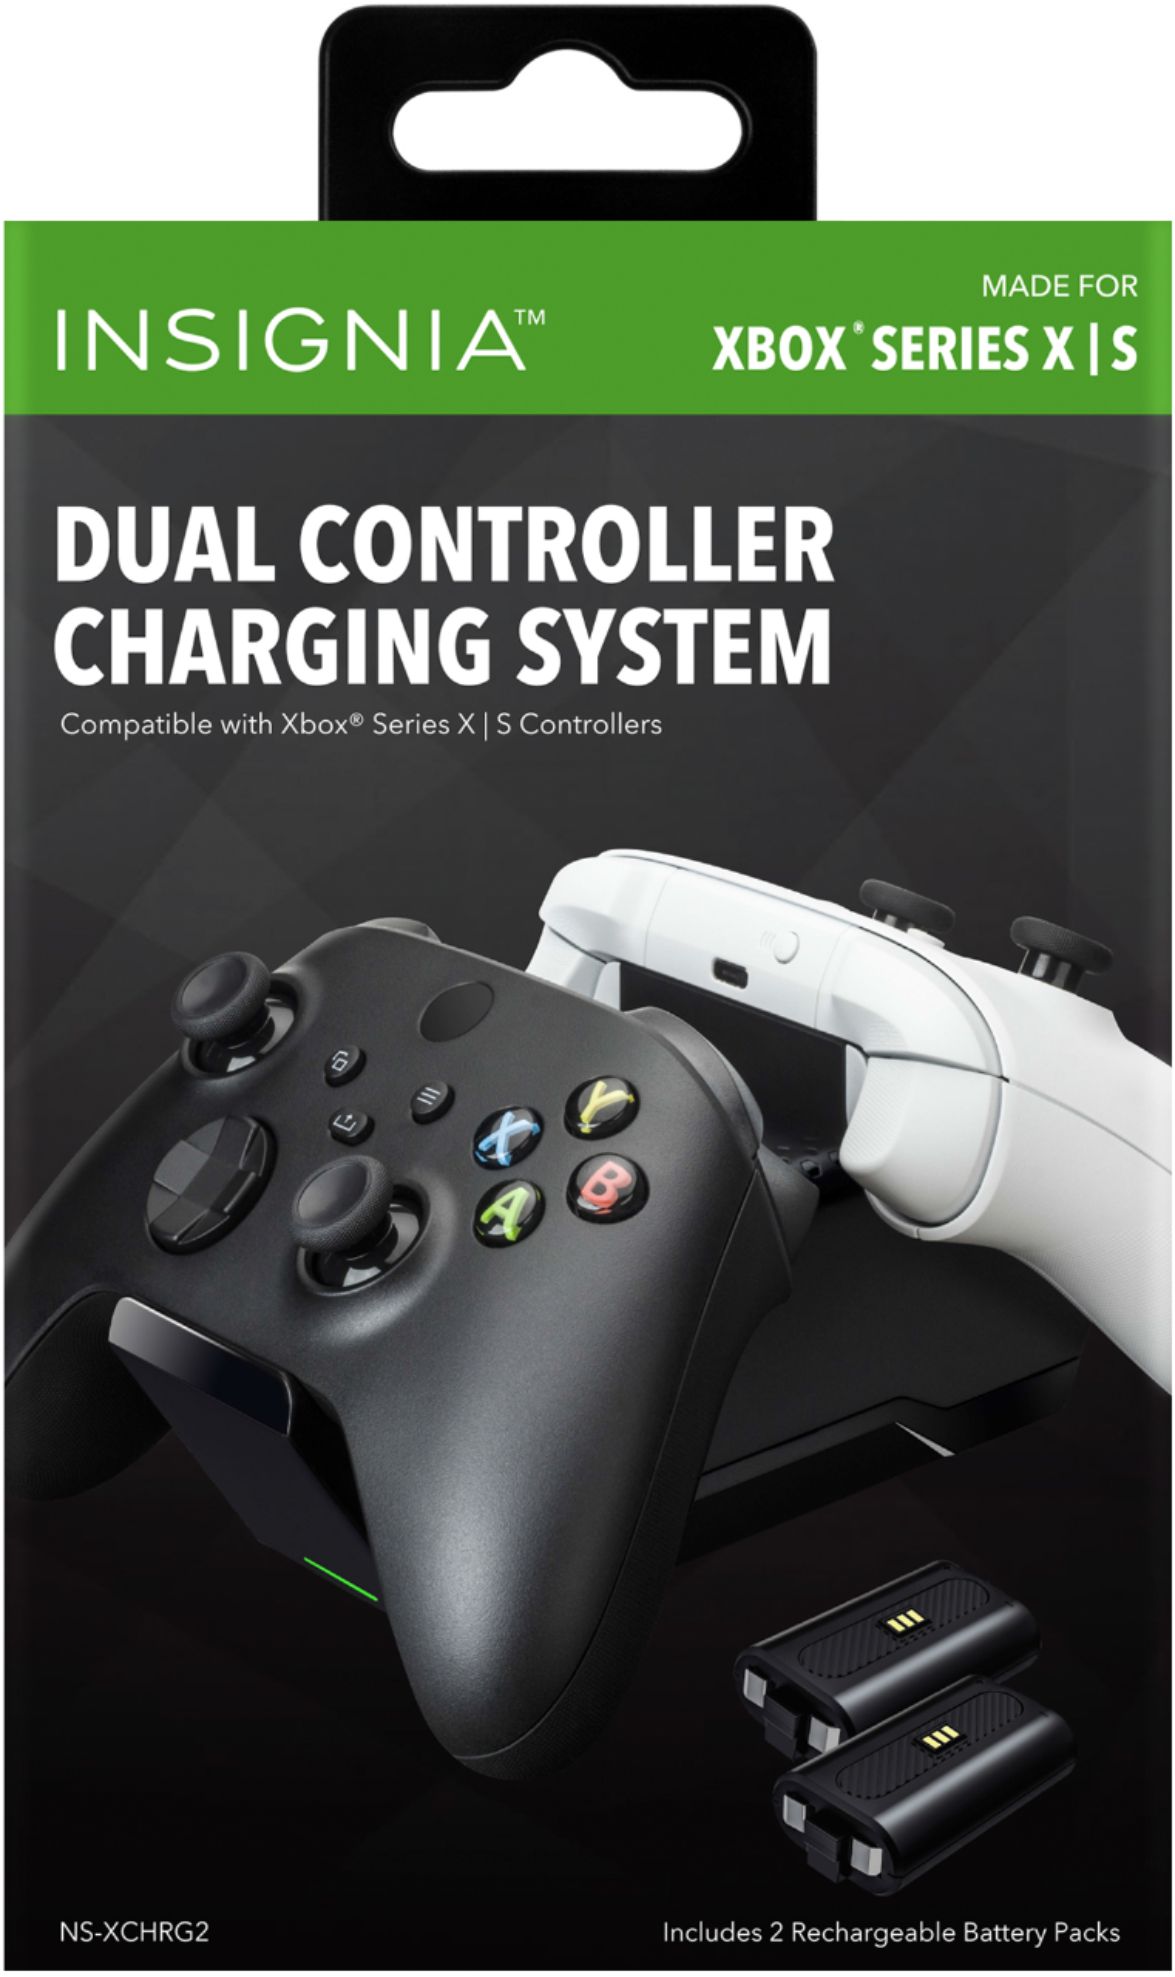 Xbox controller charger: How to charge Xbox Series X/S controllers